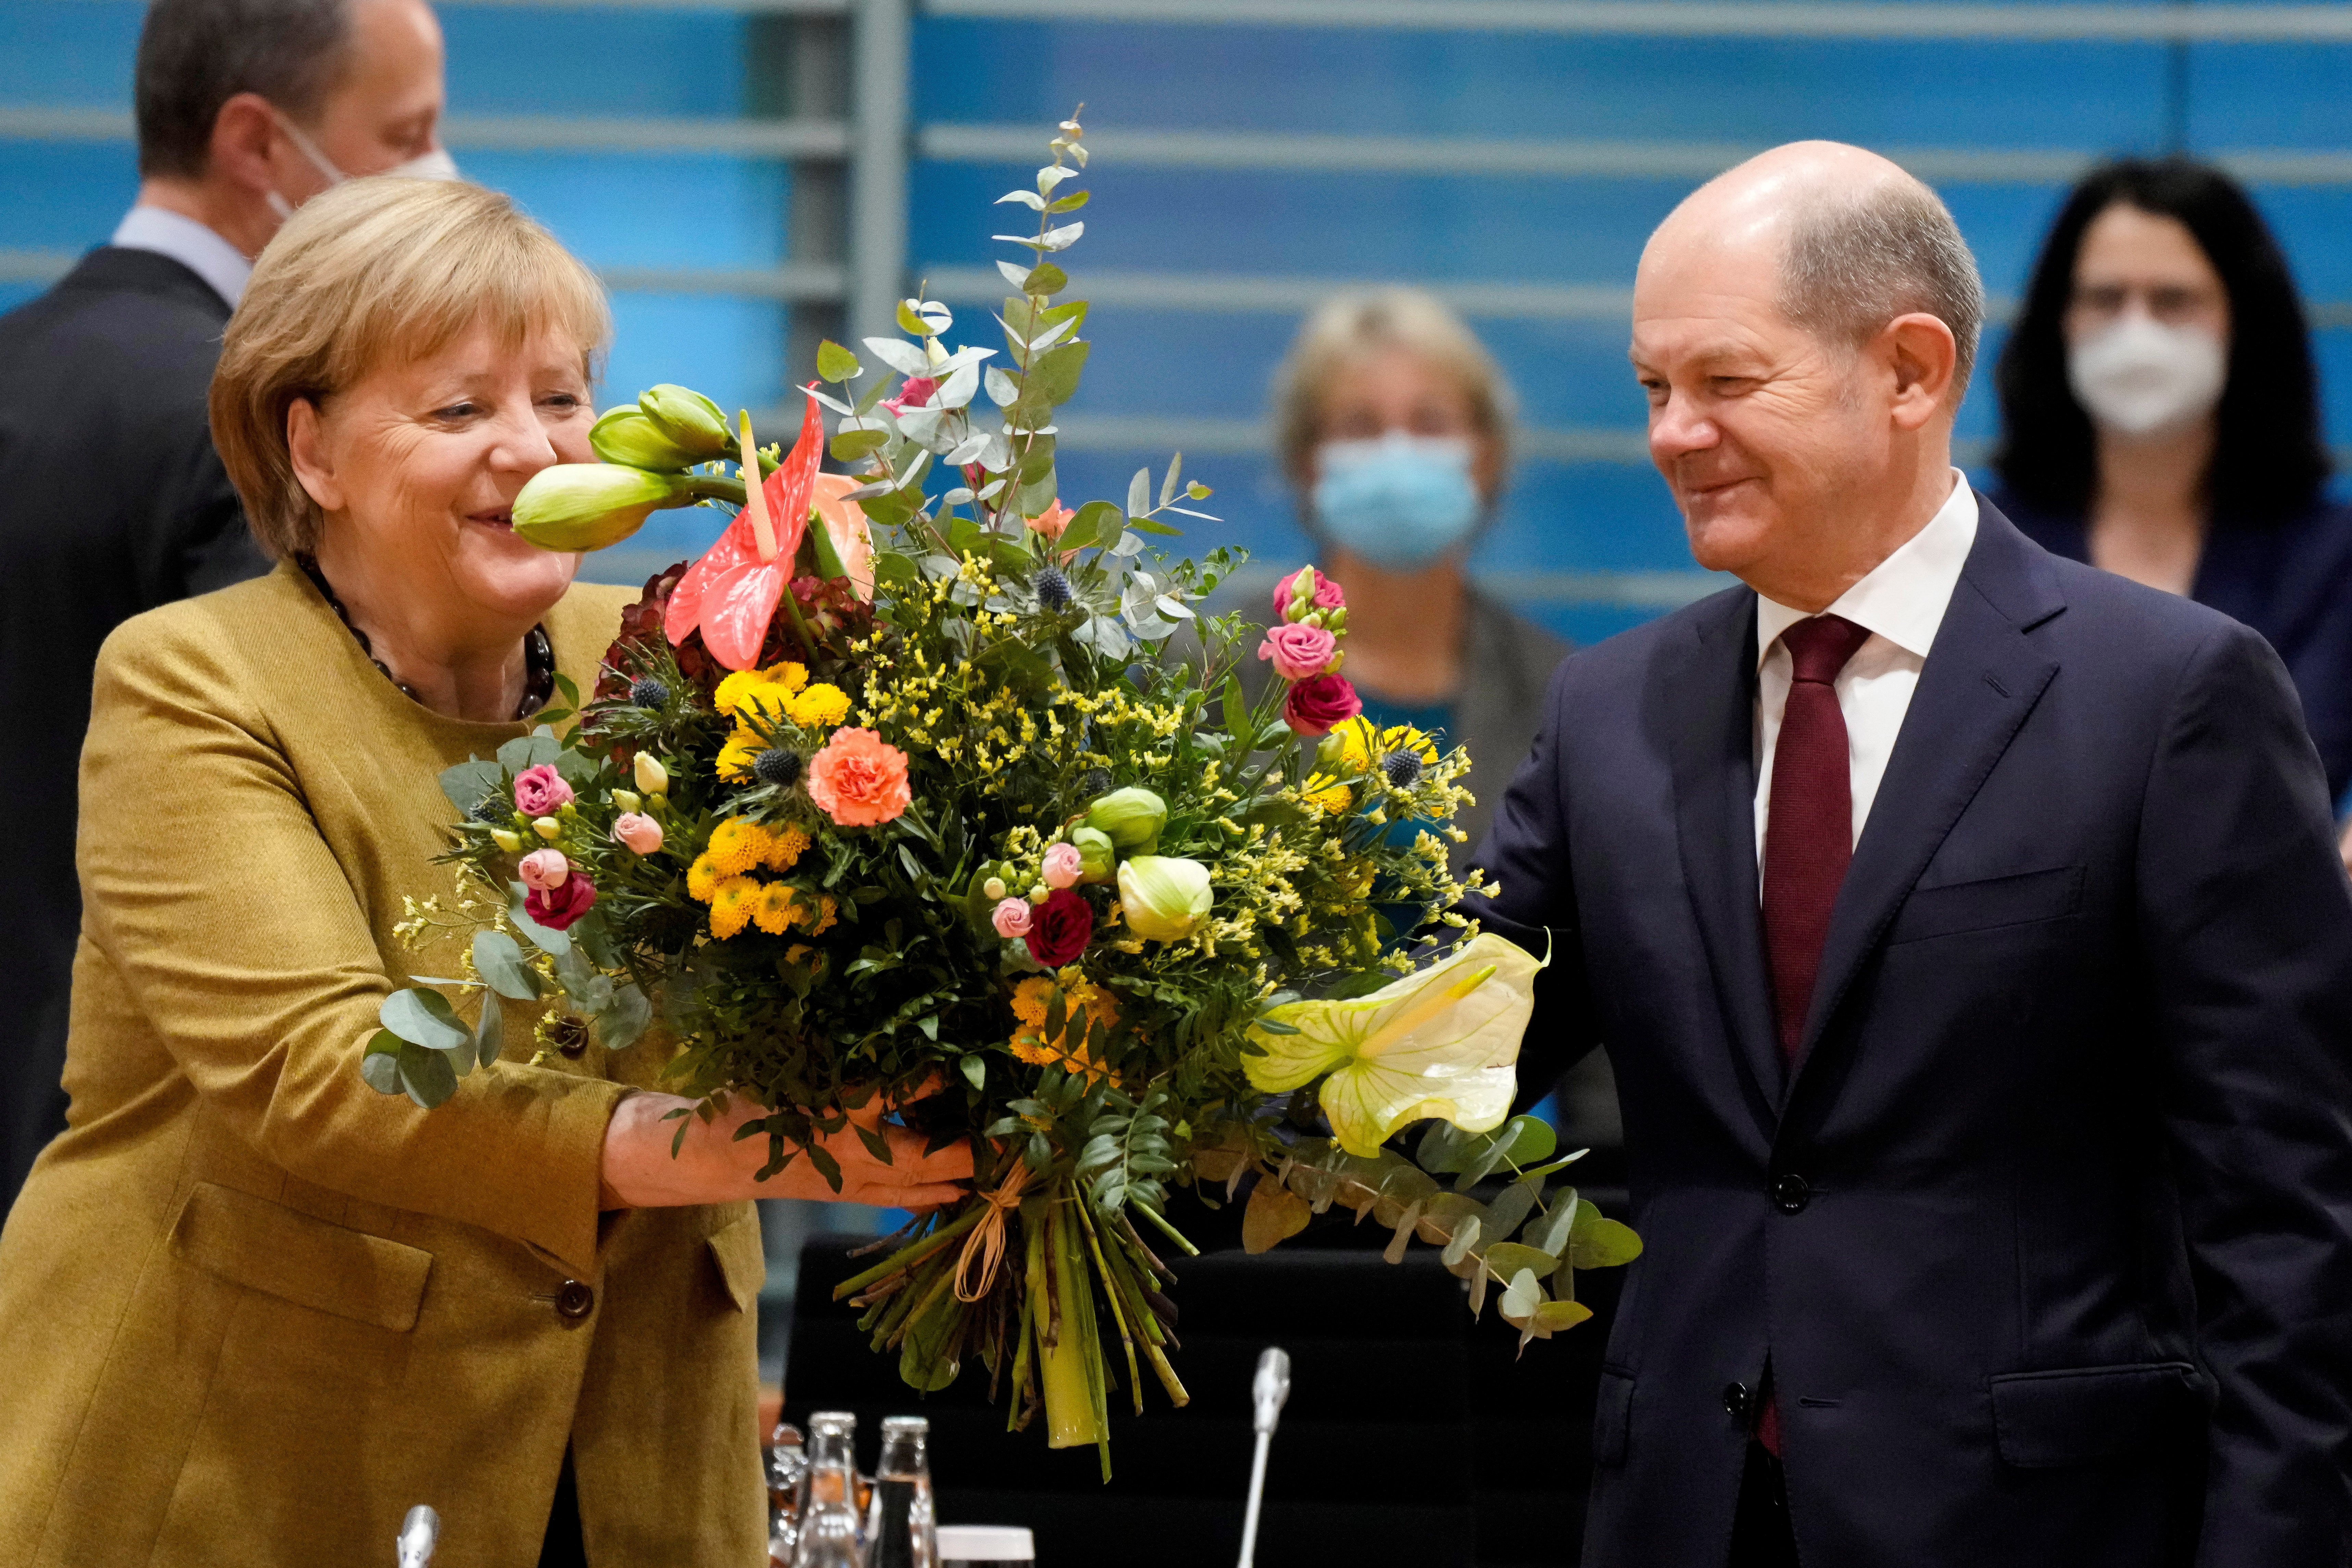 Acting German Chancellor Angela Merkel receives a bouquet from acting German Finance Minister Olaf Scholz prior to the weekly cabinet meeting at the Chancellery in Berlin, Germany, November 24, 2021. Markus Schreiber/Pool via REUTERS